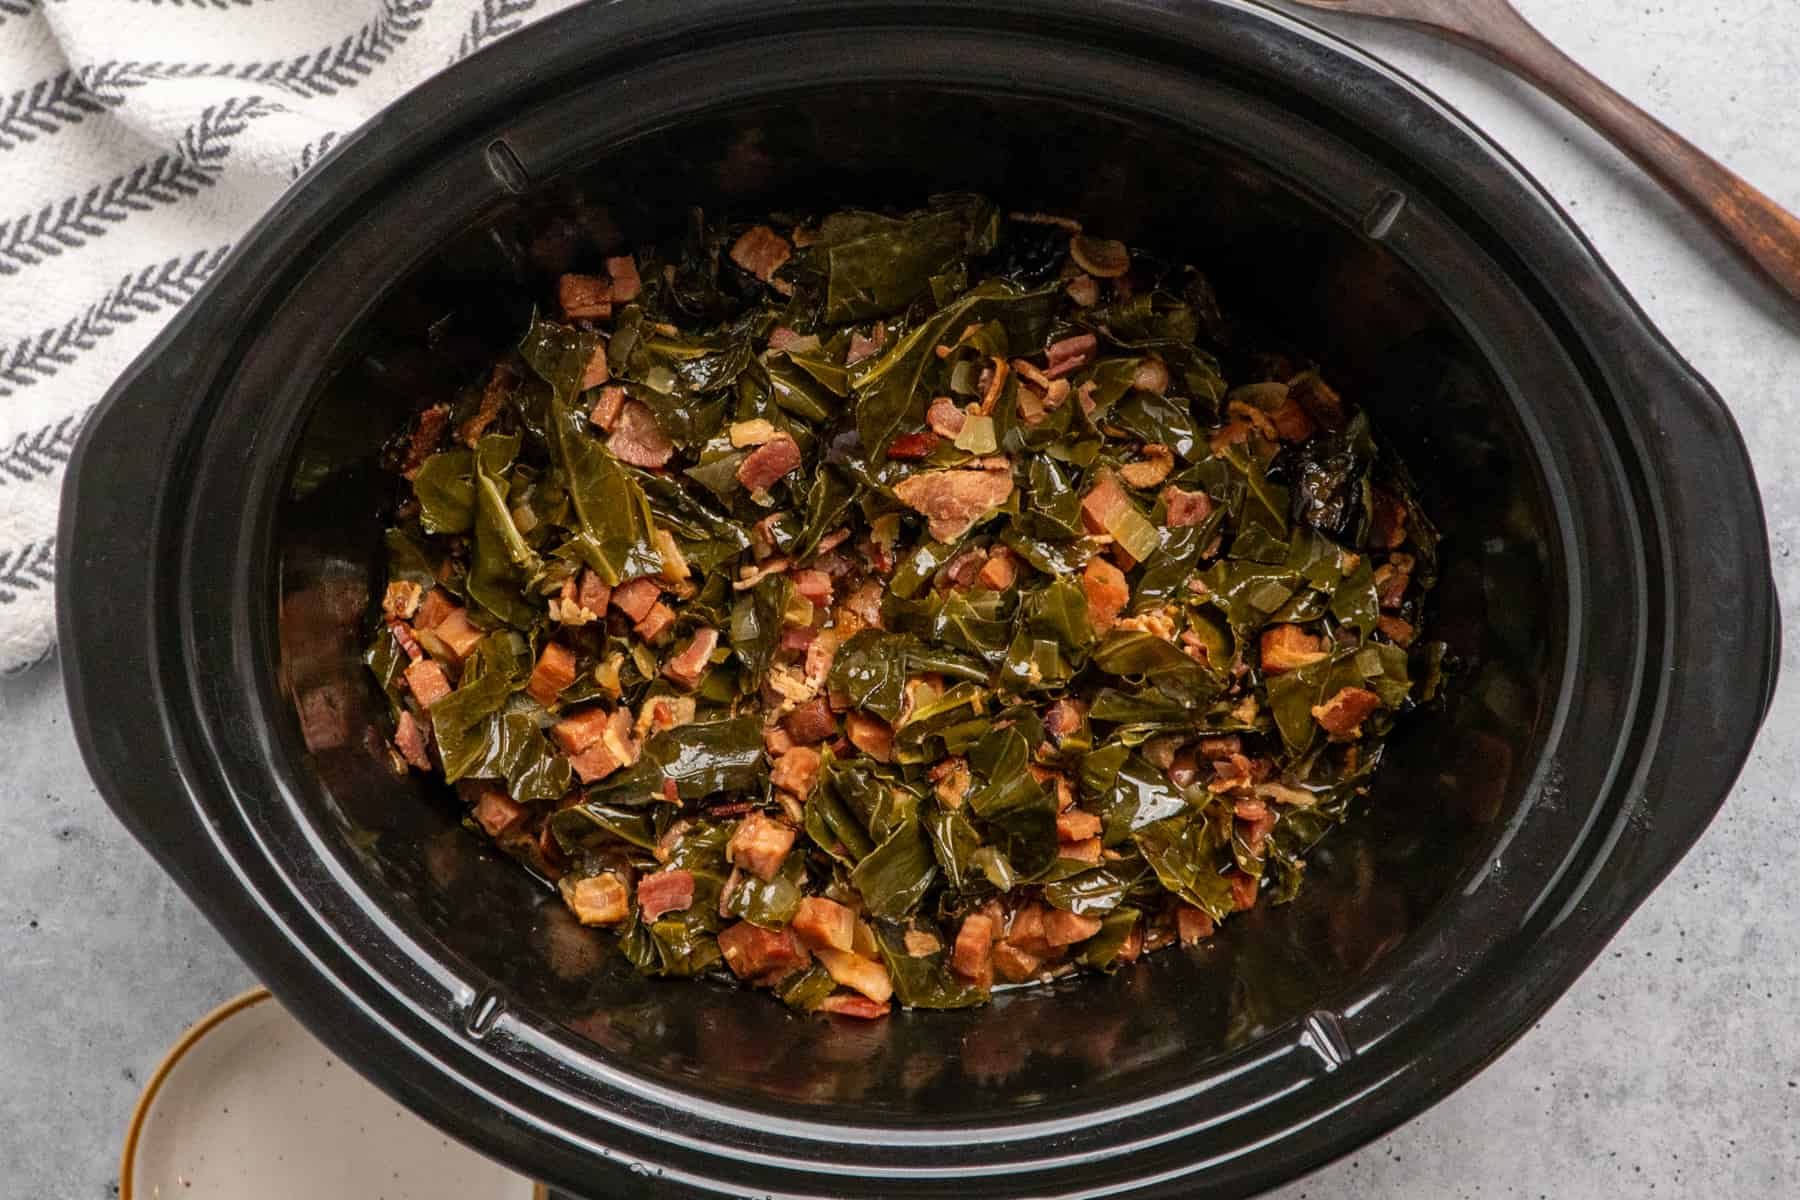 Cooked collard greens in a slow cooker.